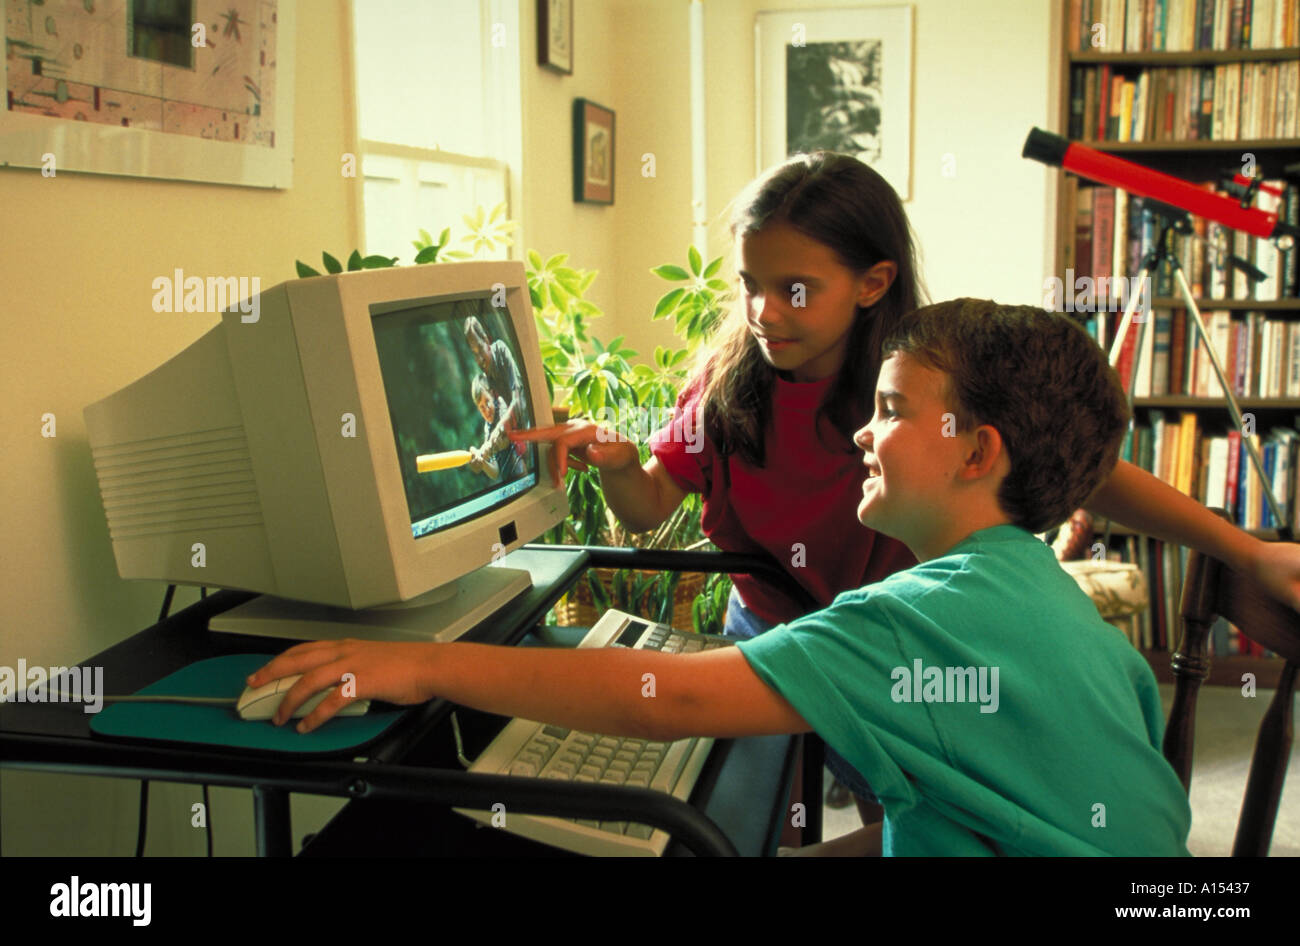 Two children sitting together at a computer Stock Photo